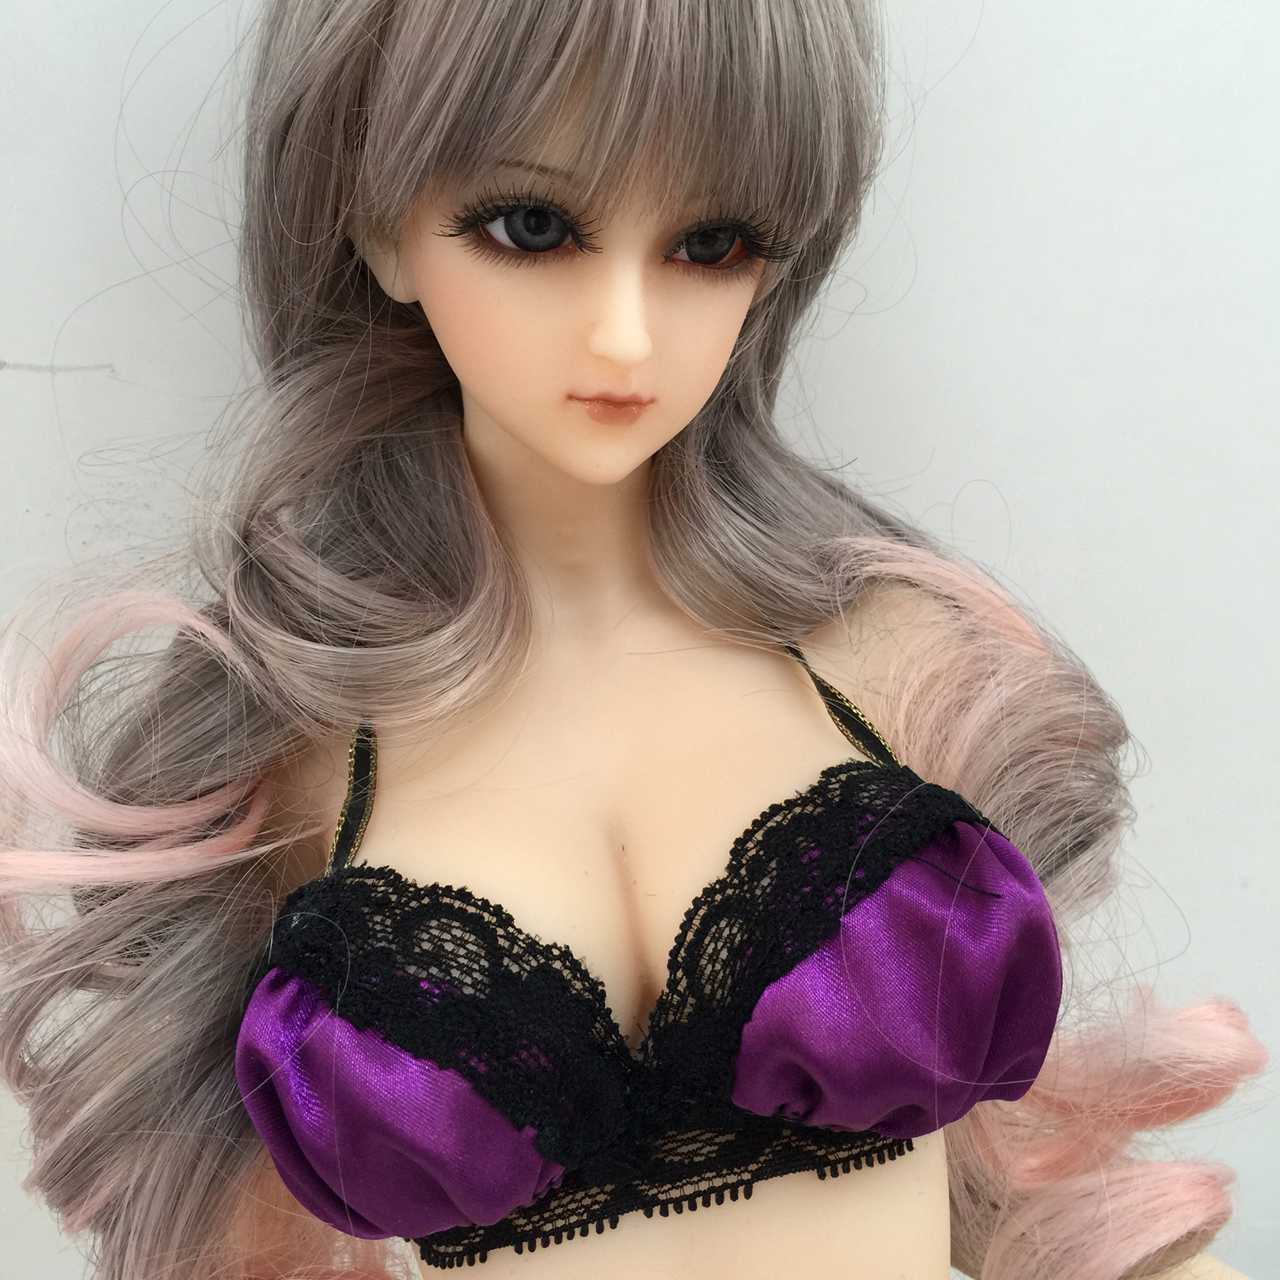 Simple Tricks For A Sex Doll Buyer To Clean Or Look After -6138